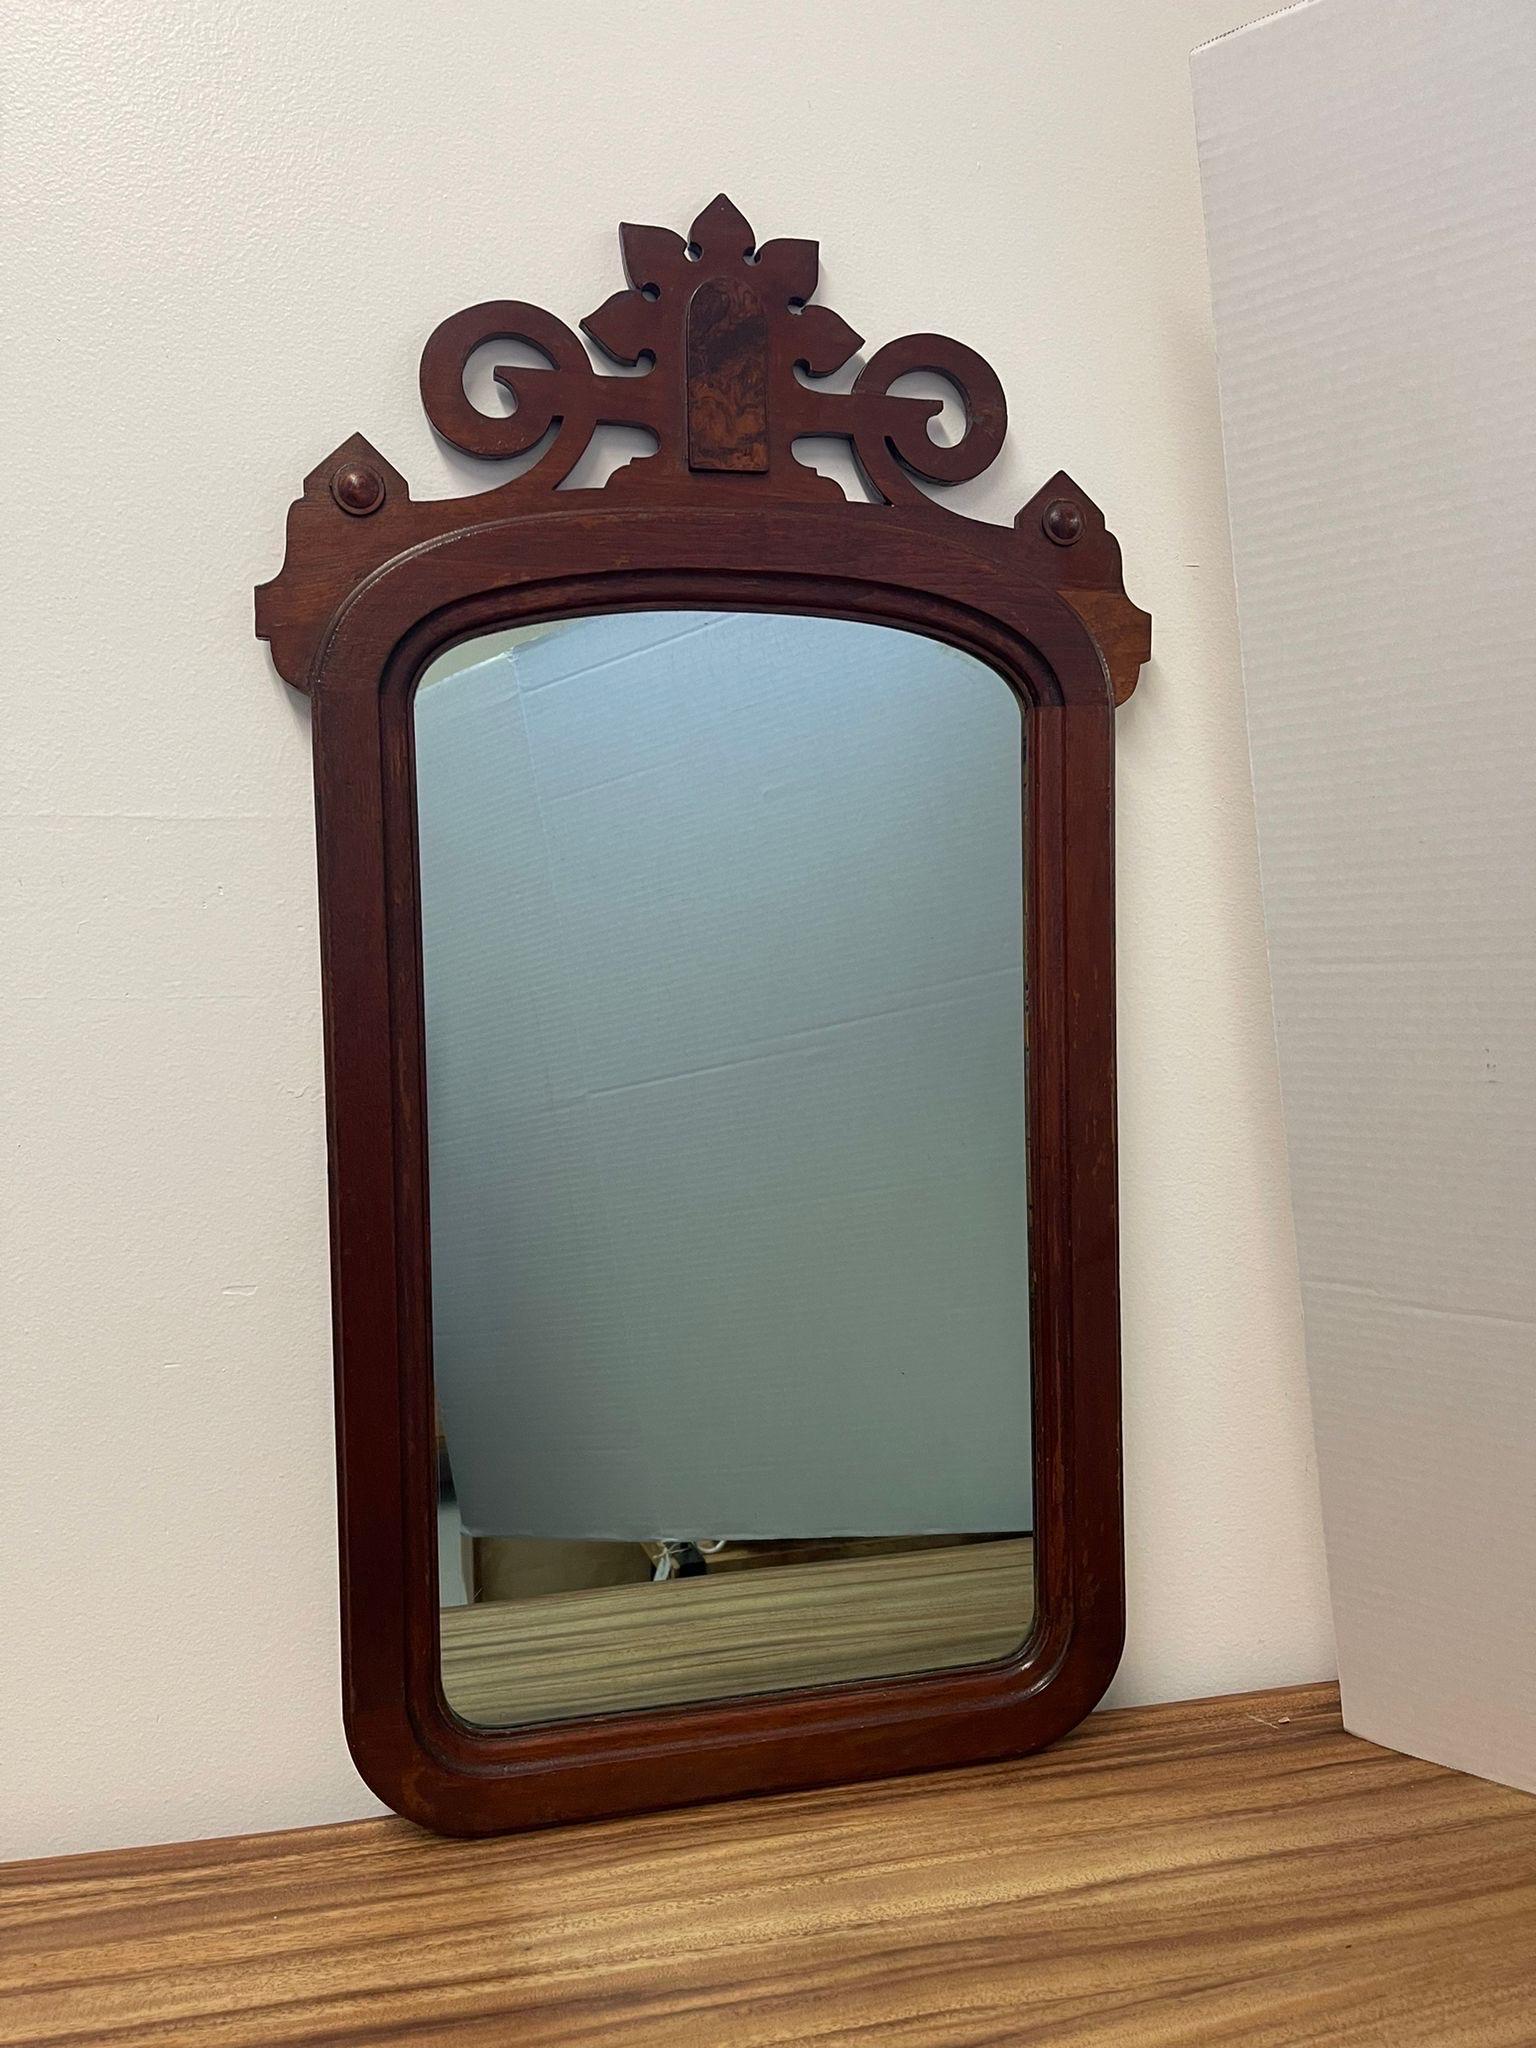 Vintage Blue Toned Mirror with Intricate Decorative Detailing on the Frame with Burl Accent. Possibly Antique According to Research . Vintage Condition Consistent with Age as Pictured.

Dimensions. 19 W ; 1 D ; 34 H